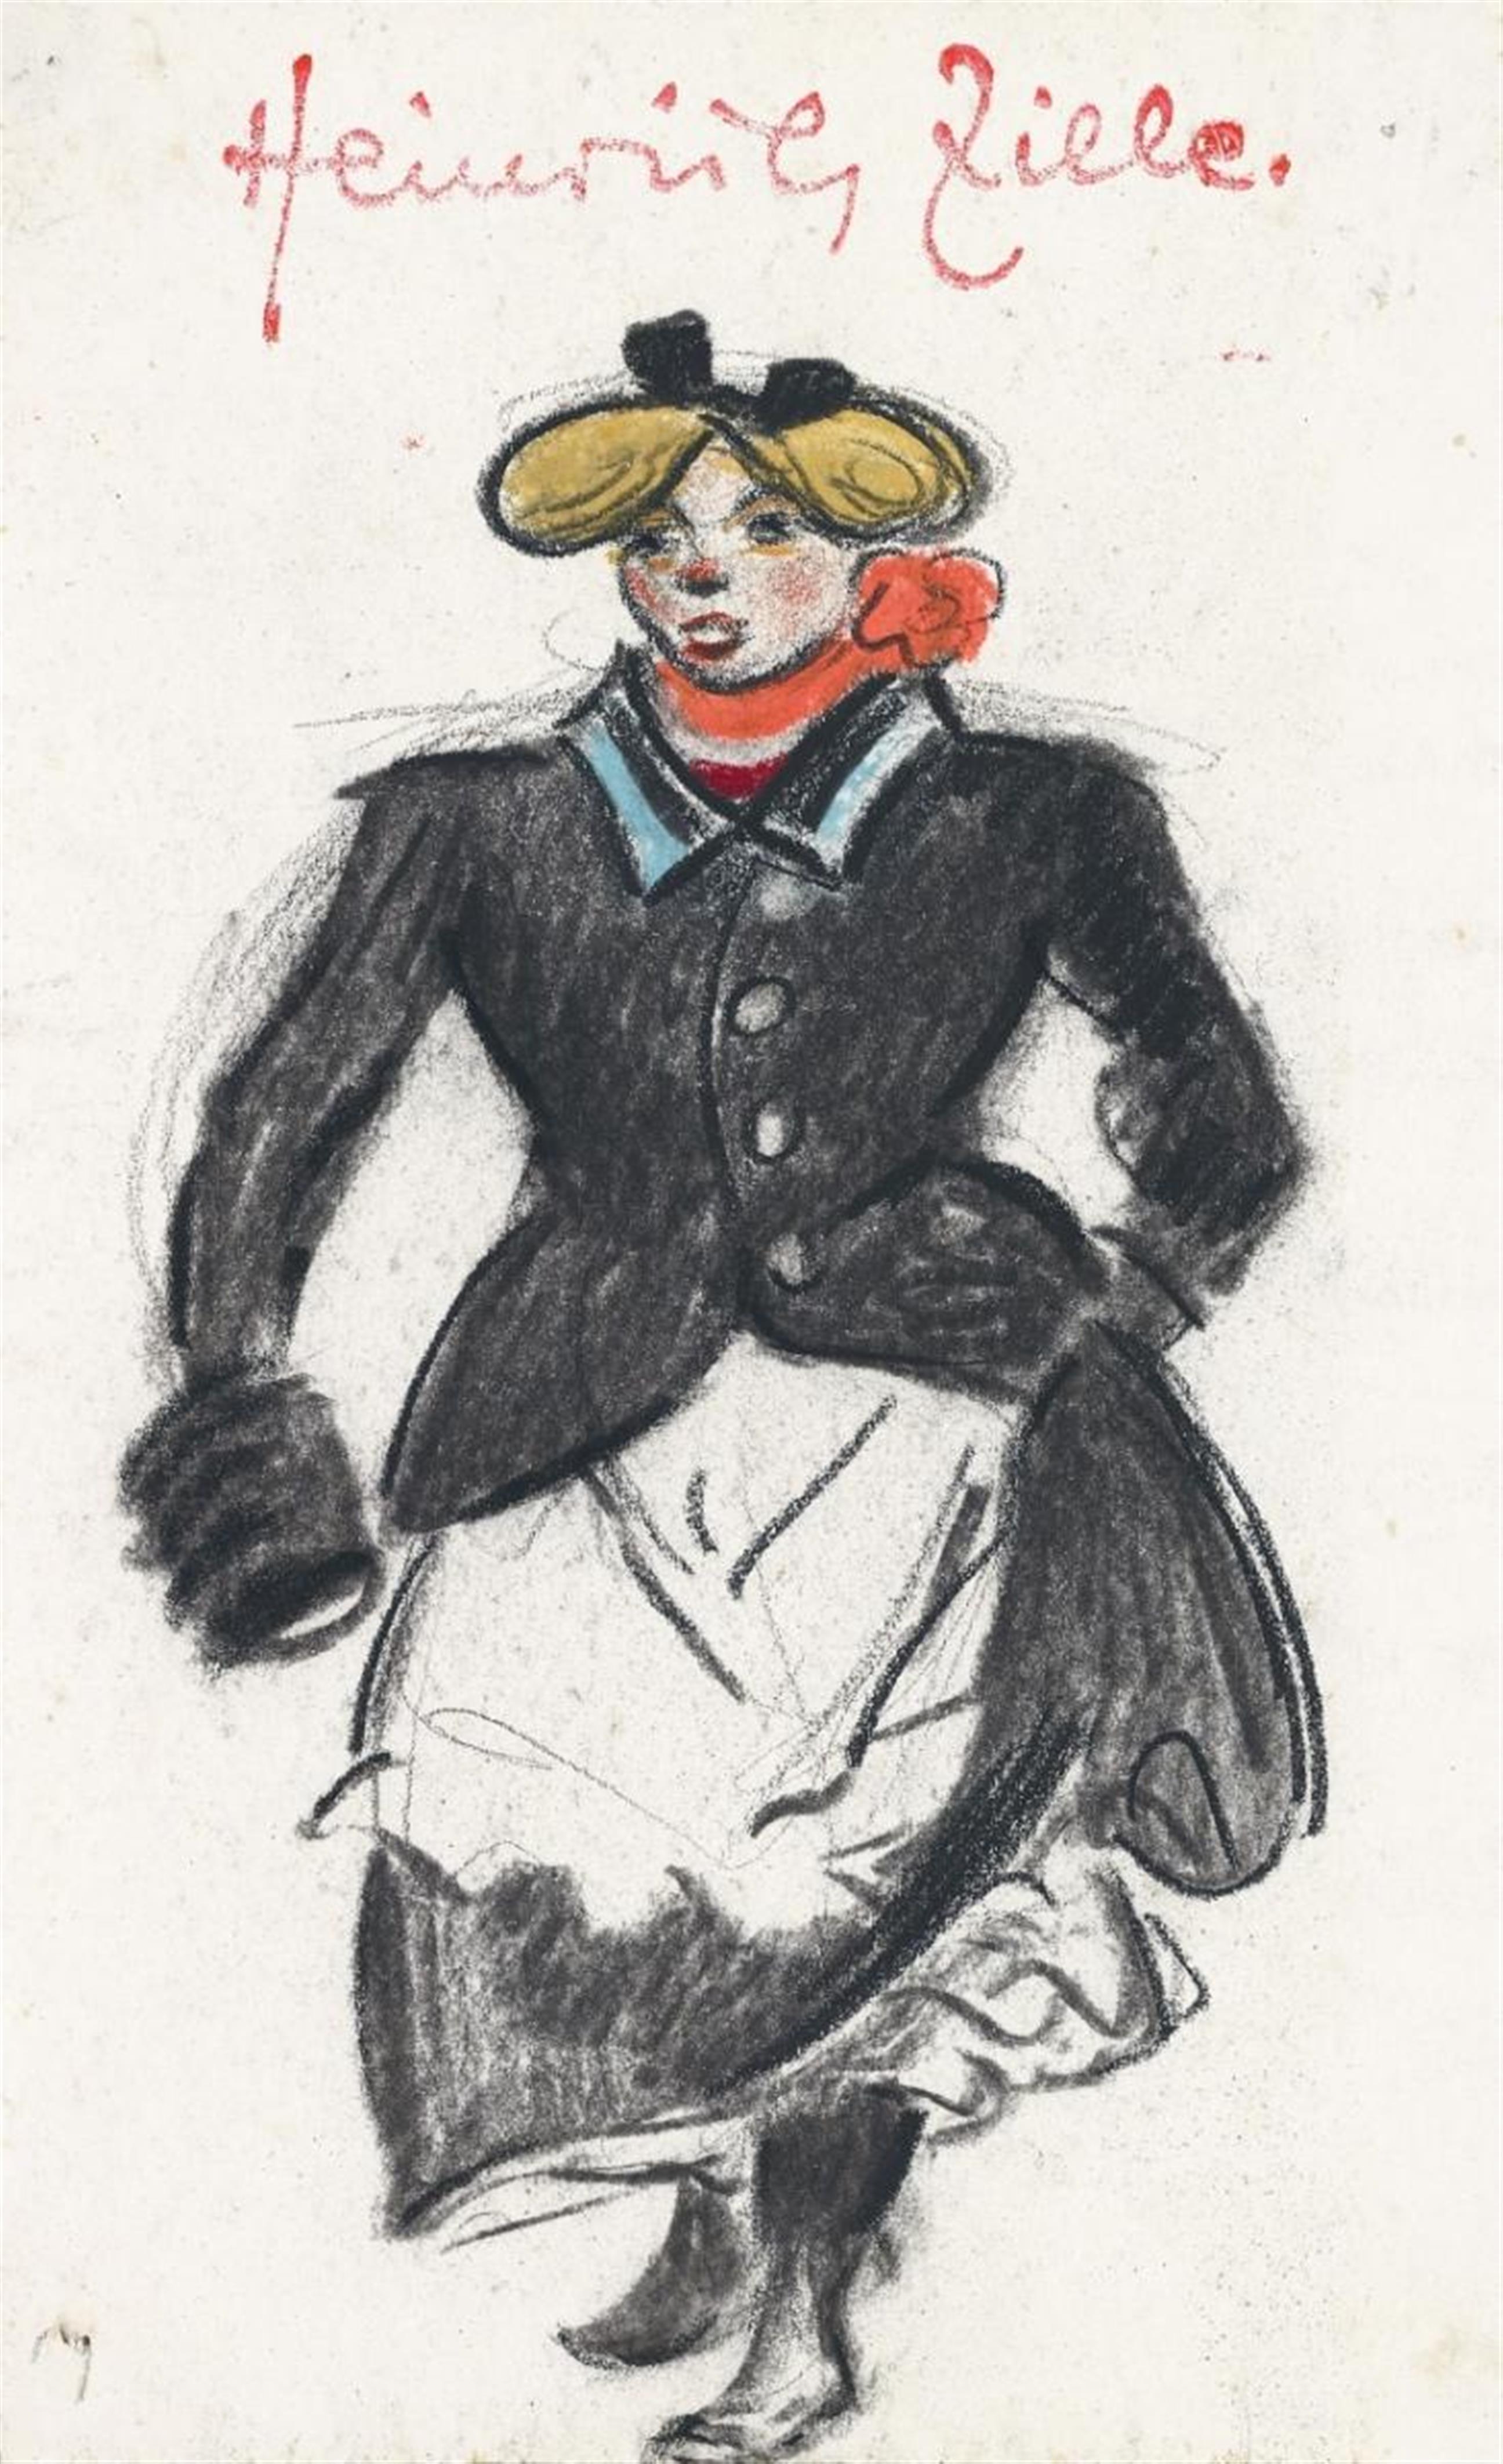 Heinrich Zille - Ein kesses Berliner Mädchen mit Muff (A Cheeky Young Berlin Woman with a Muff) - image-1